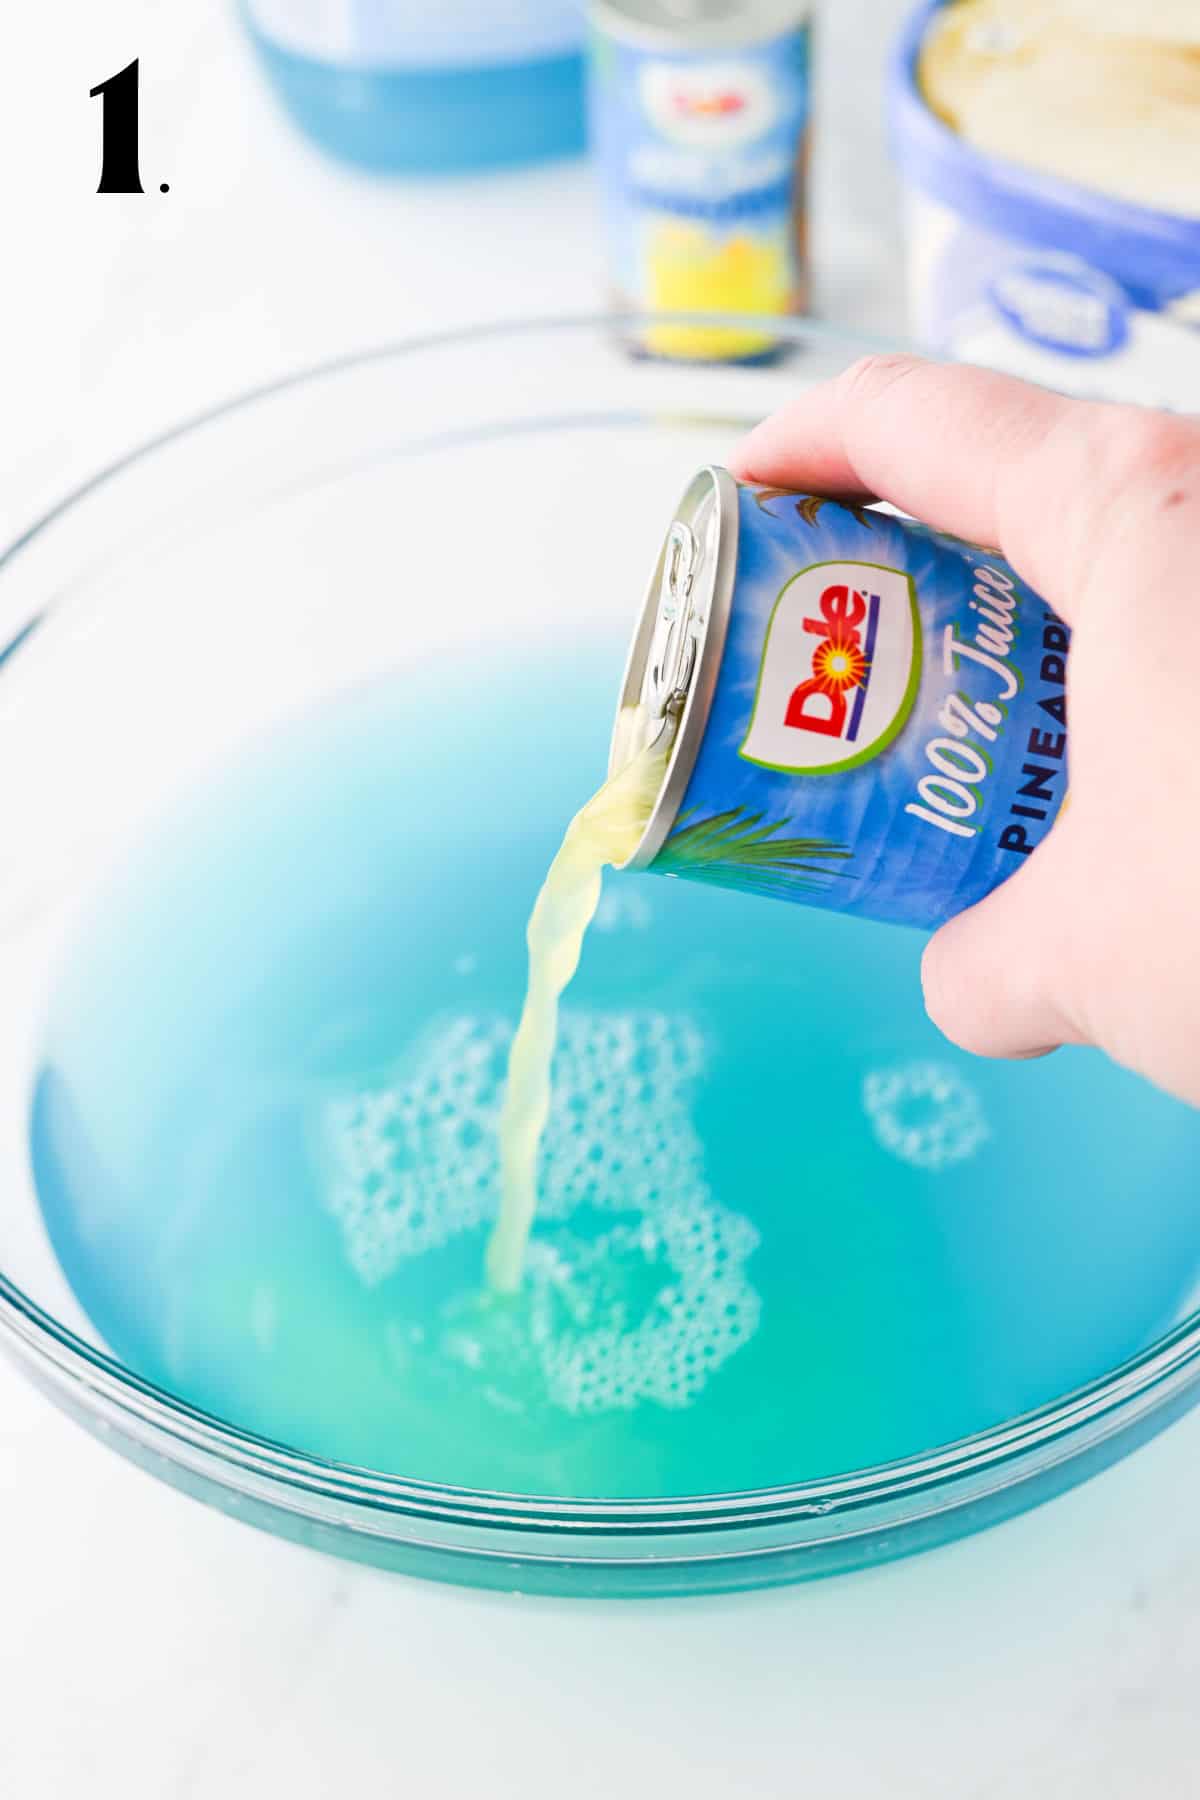 How to Make Blue Punch Step 1 - adding Hawaiian punch and pineapple juice to punch bowl.